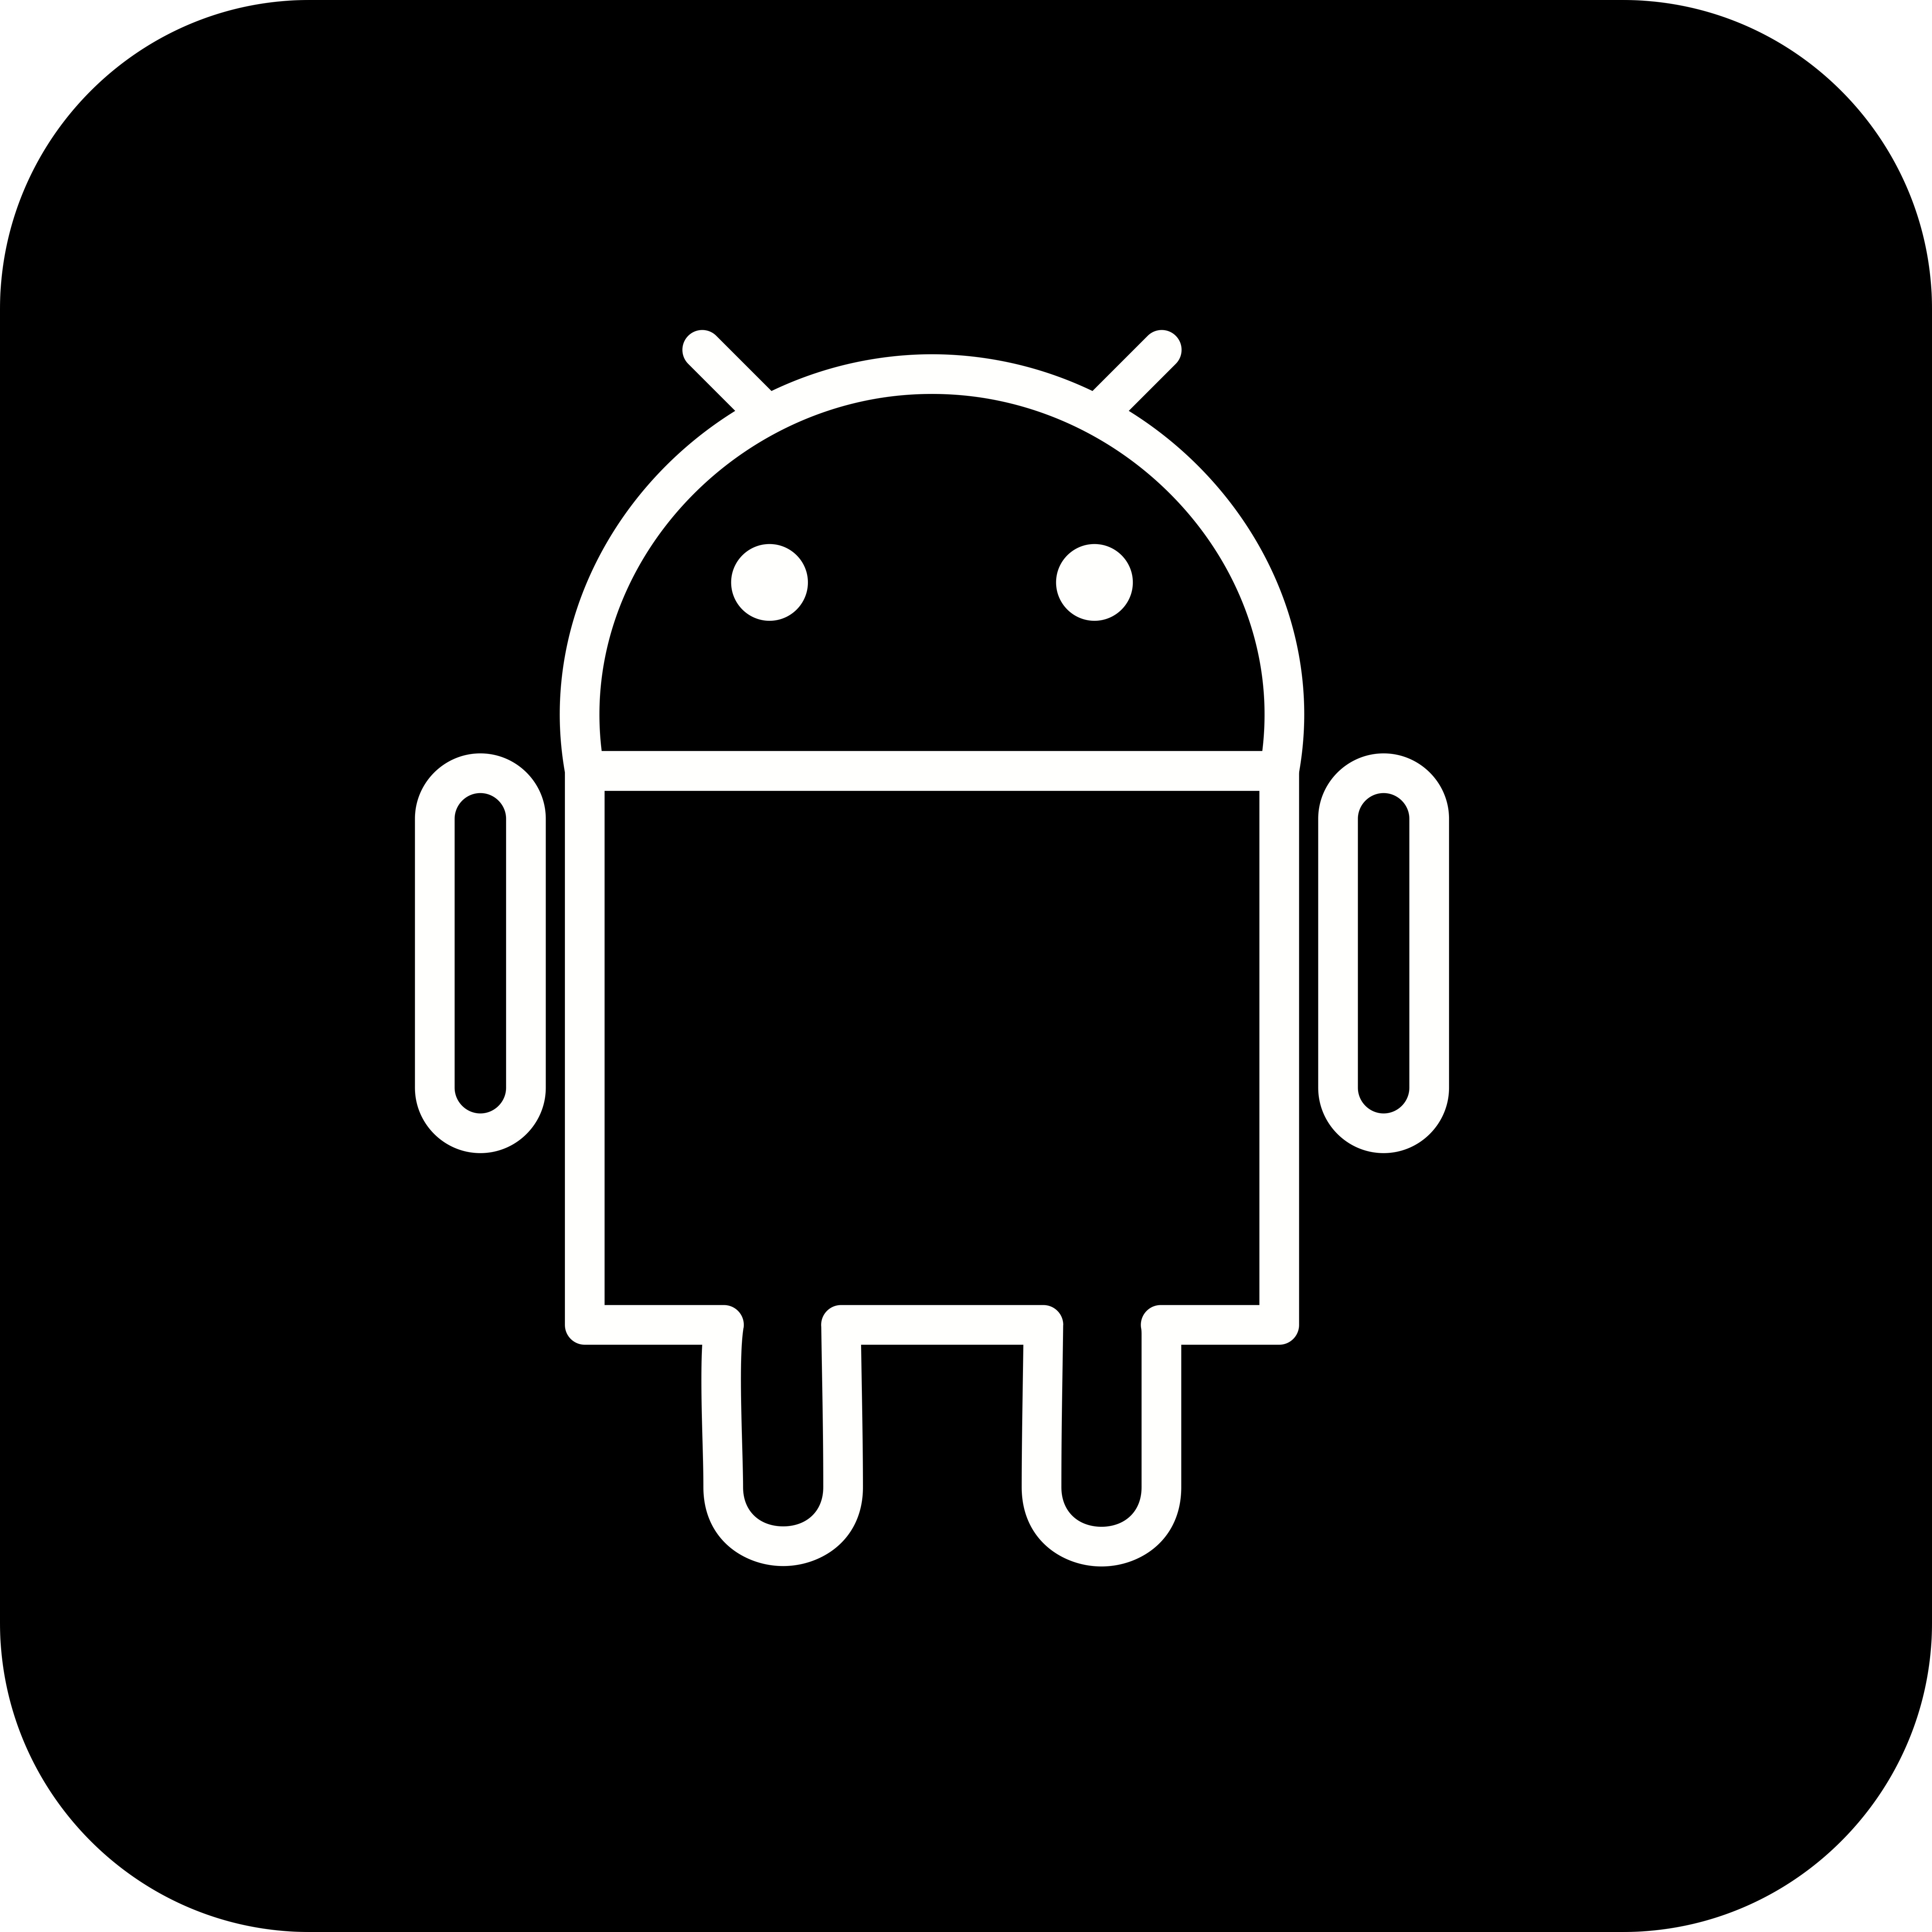 Download Android Vector Icon - Download Free Vectors, Clipart ...